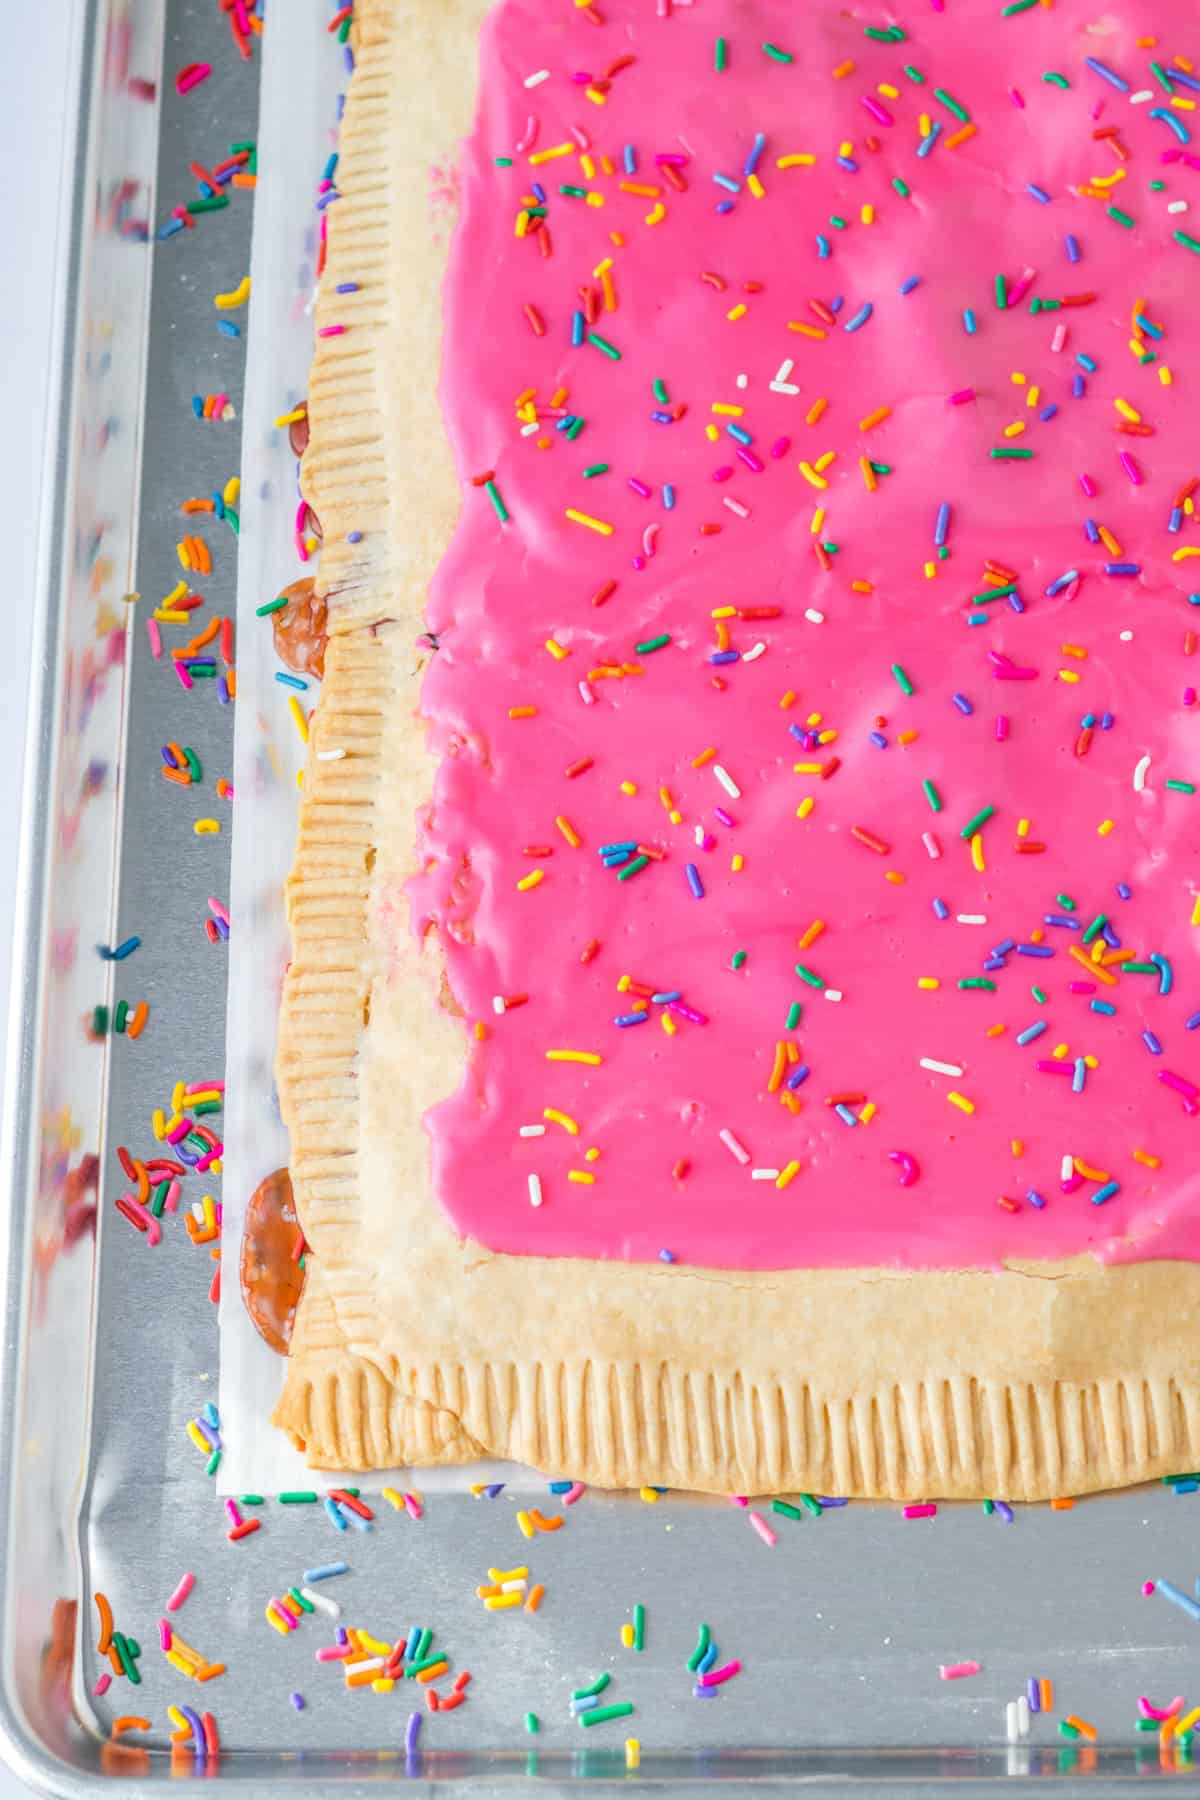 Homemade giant strawberry pop tart made with pie crust, strawberry jam, pink icing, and rainbow sprinkles on a sheet pan.